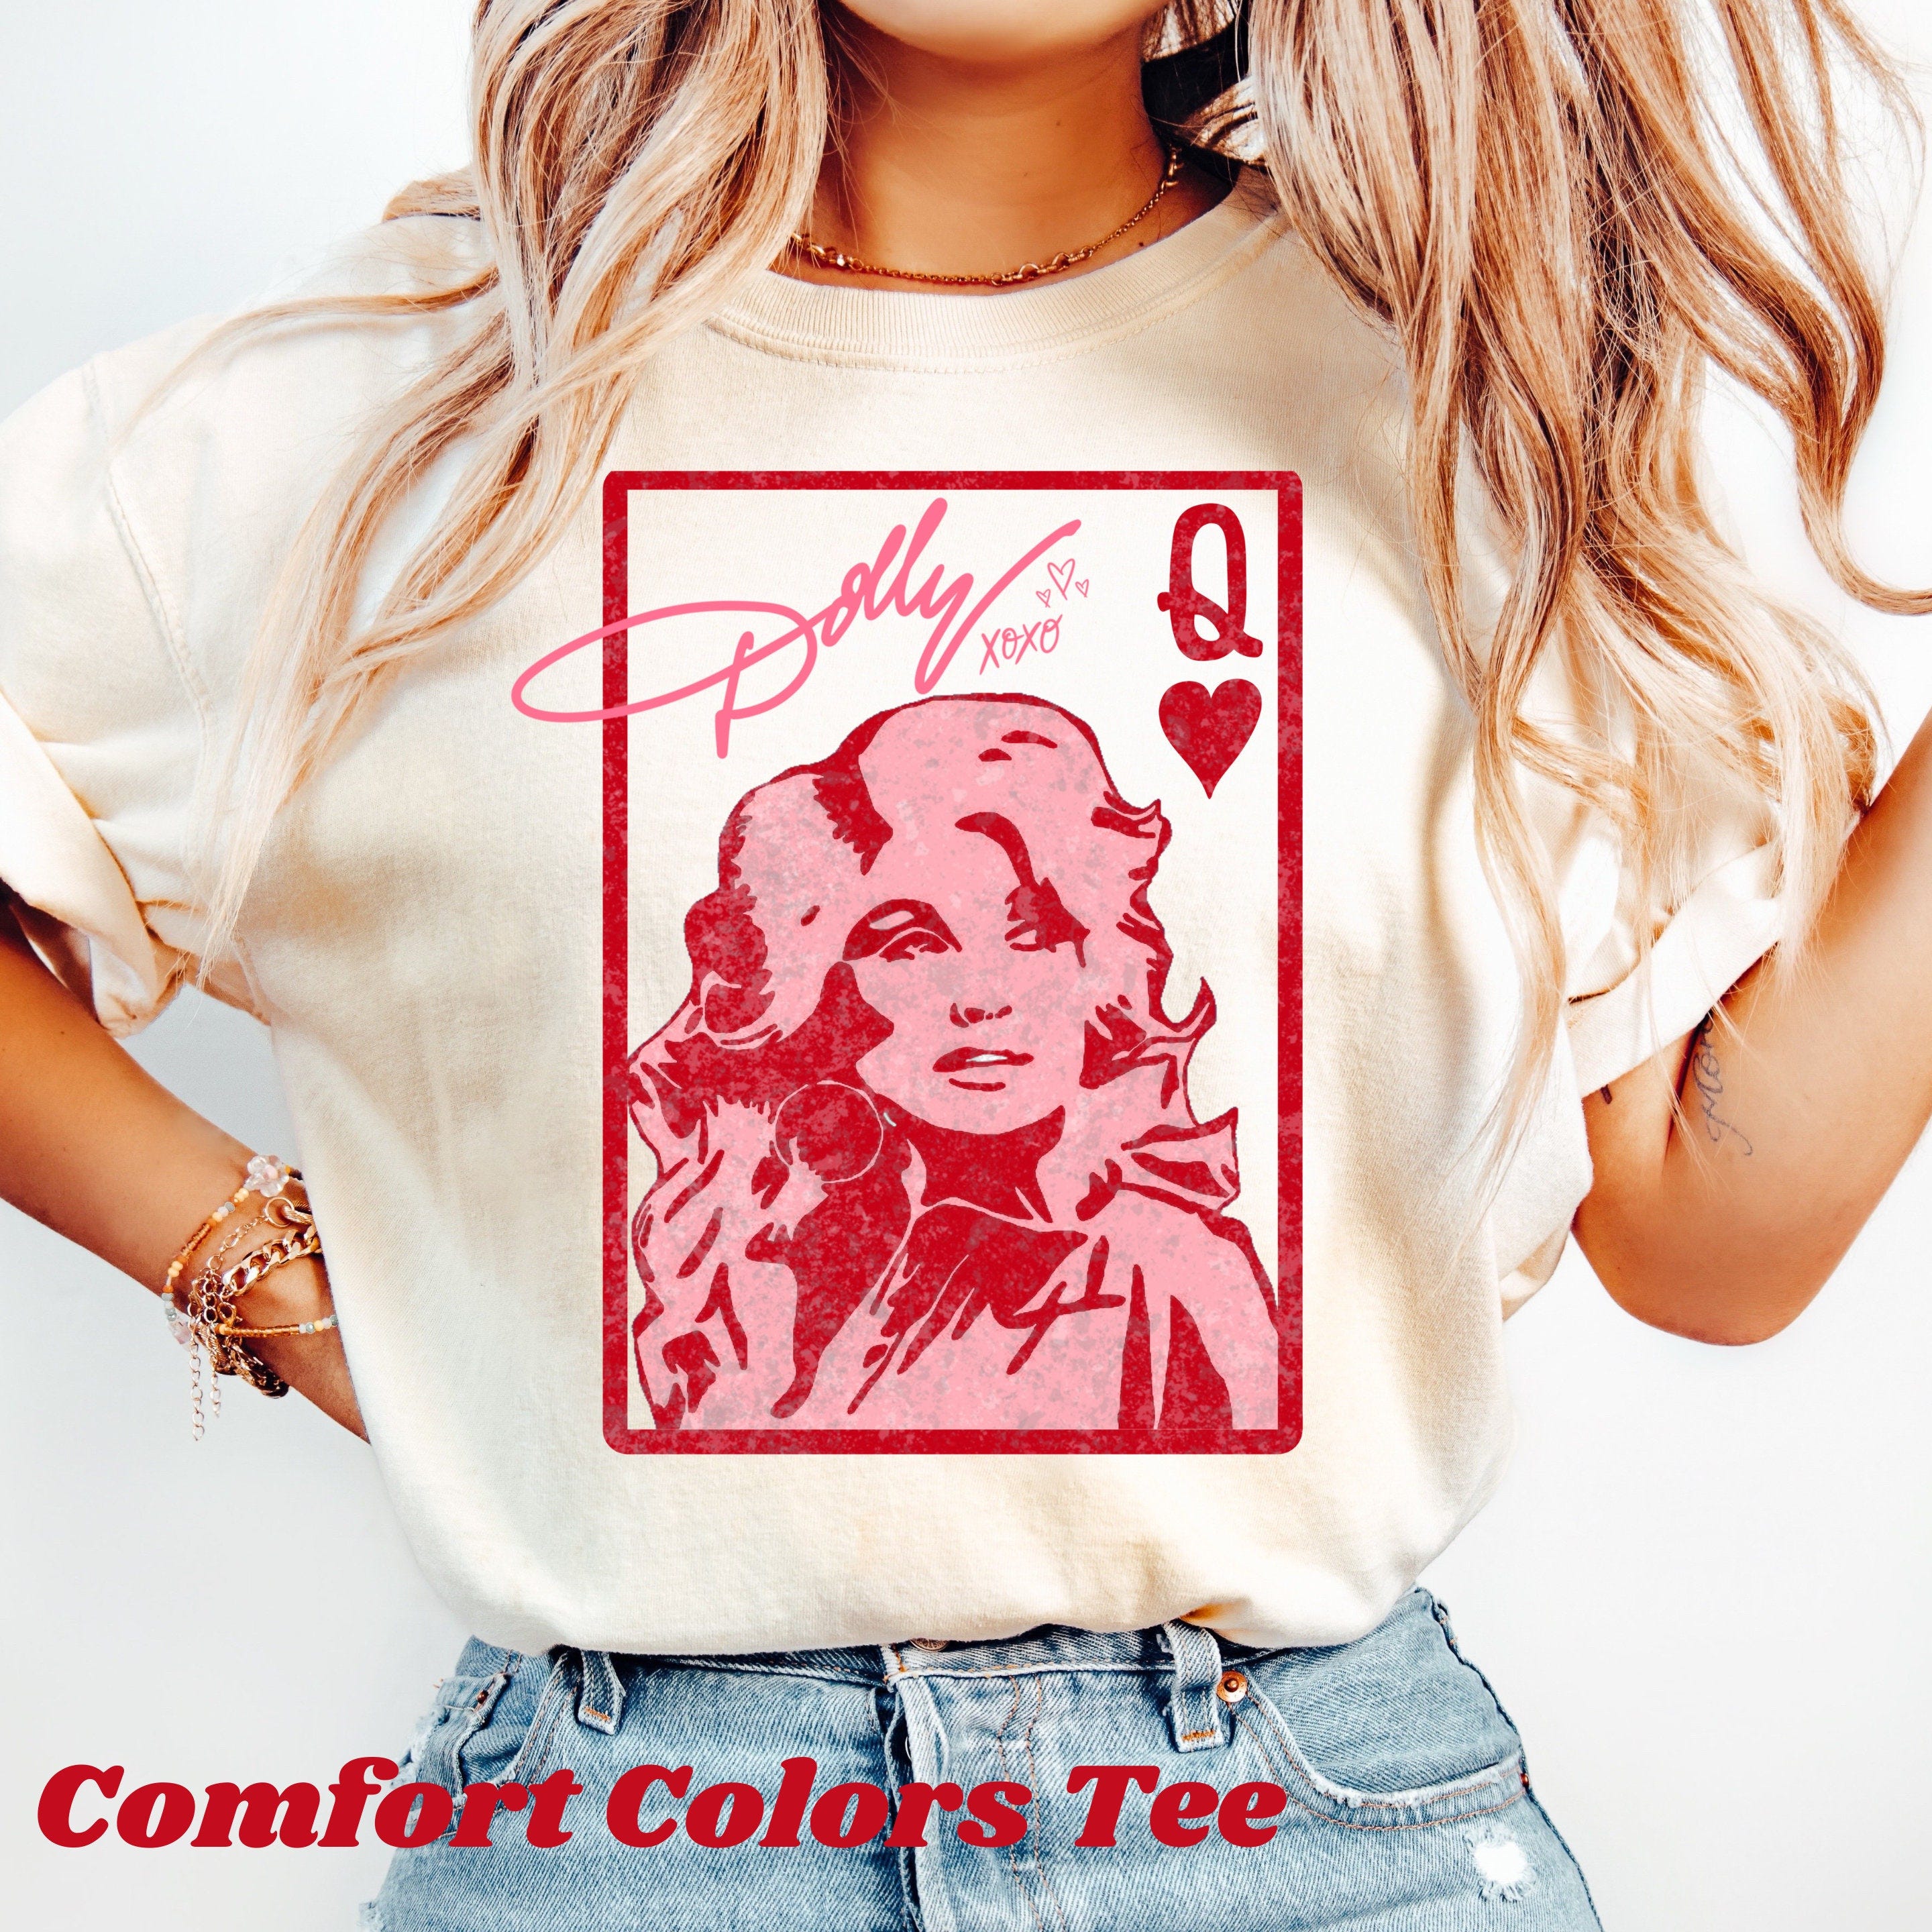 Dolly Parton Queen of Hearts Shirt,Dolly Playing Card T-Shirt,Dolly Inspired T-Shirt,Country Music Shirt,Queen of Hearts,Queen of Dolly Tee